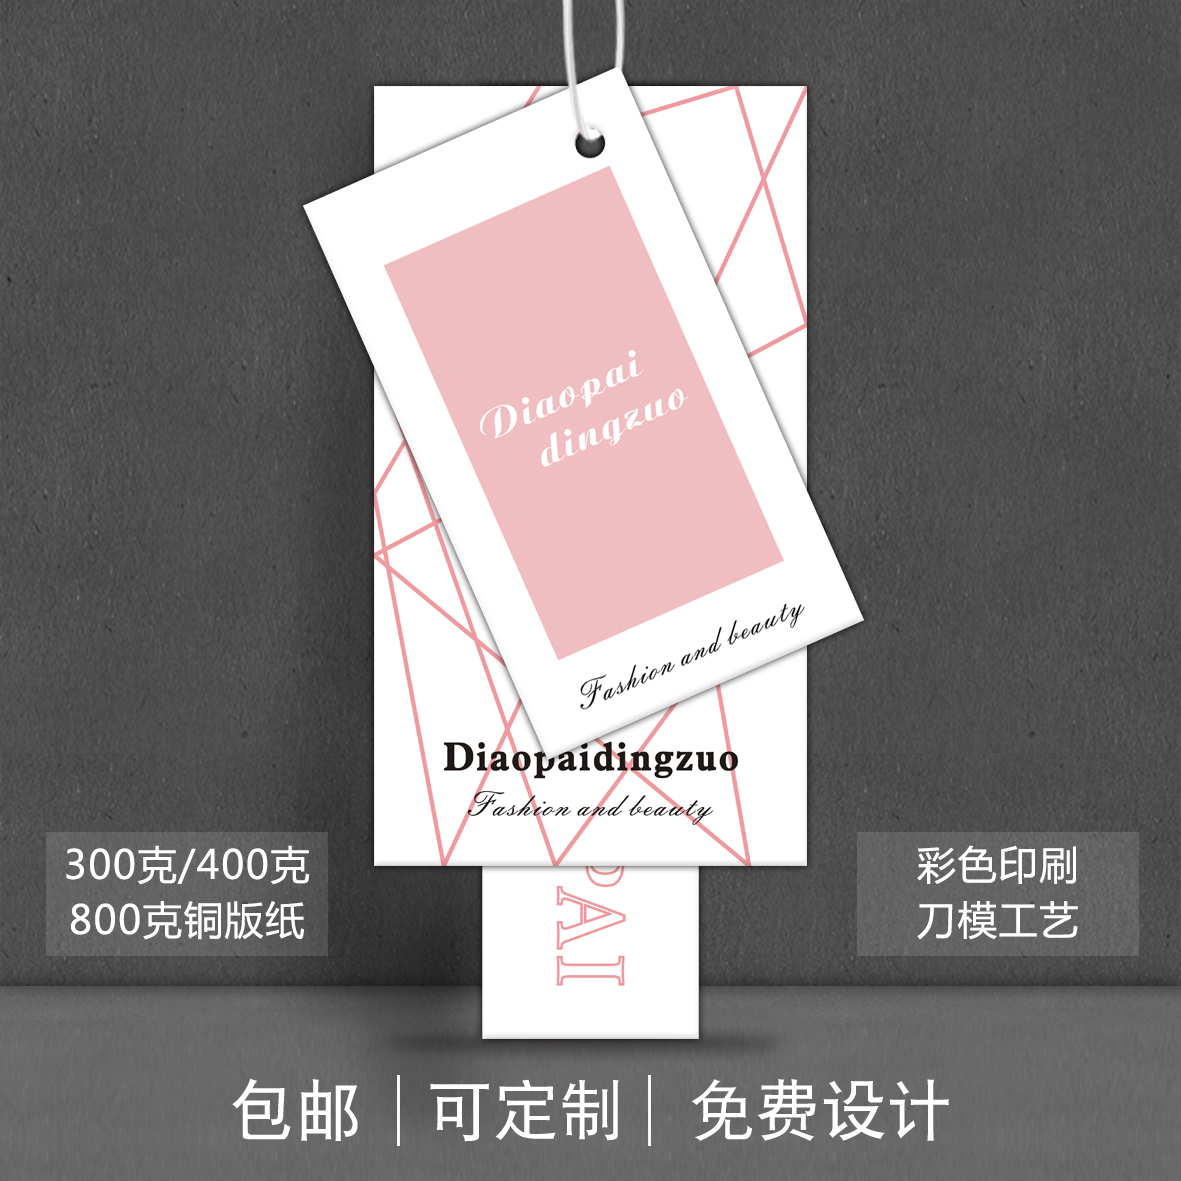 The tailored clothing tag ordered the women's clothes tag private custom - made massive single template